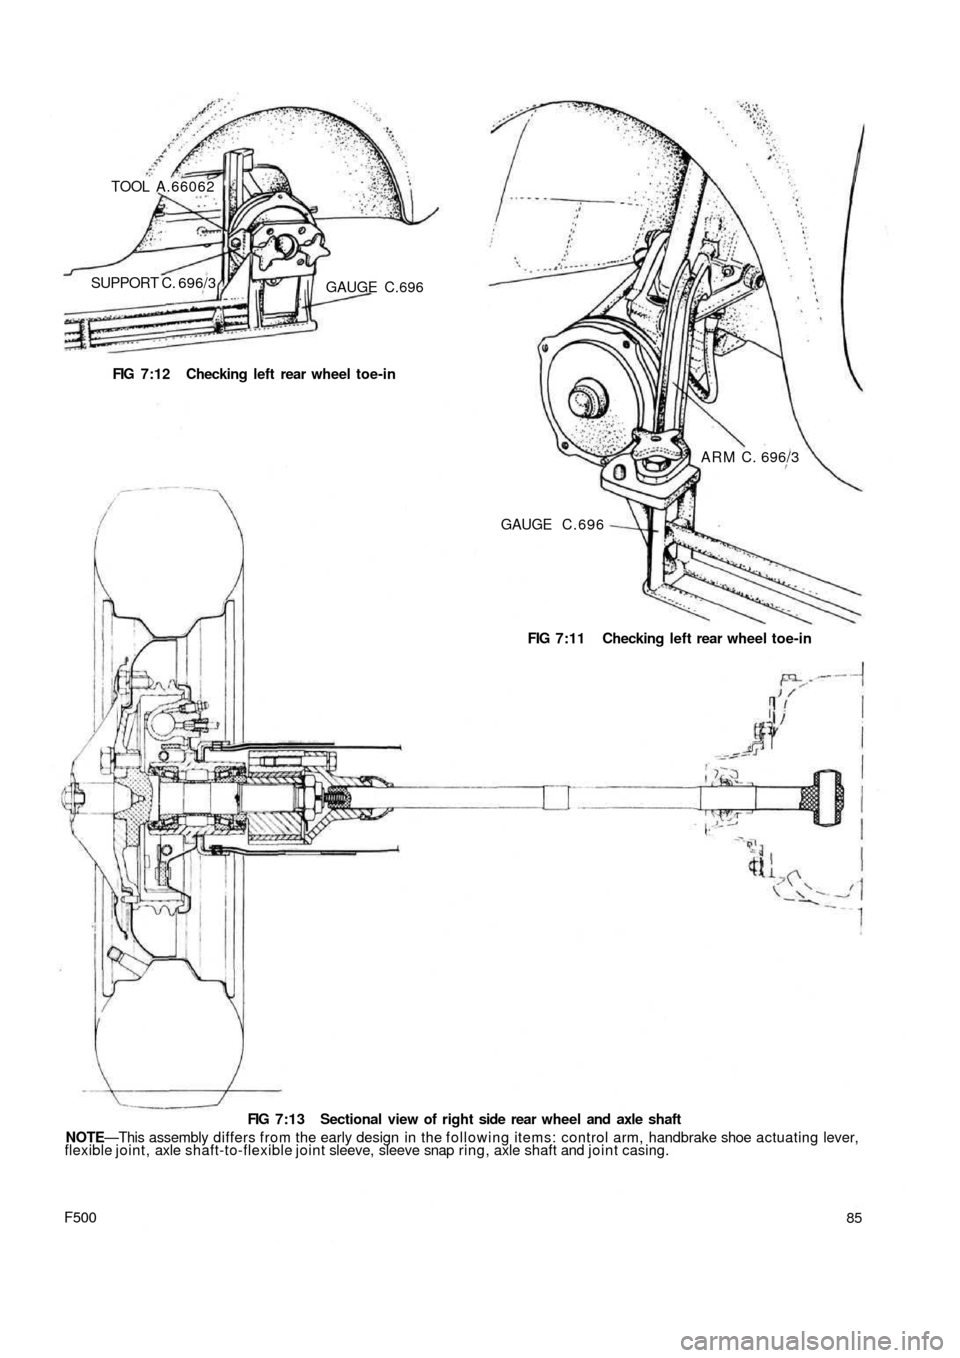 FIAT 500 1972 1.G Workshop Manual TOOL A.66062
SUPPORT C. 696/3GAUGE C.696
FIG 7:12 Checking left rear wheel toe-in
ARM C. 696/3
GAUGE C . 6 9 6
FIG 7:11 Checking left rear wheel toe-in
F500
FIG 7:13 Sectional view of right side rear 